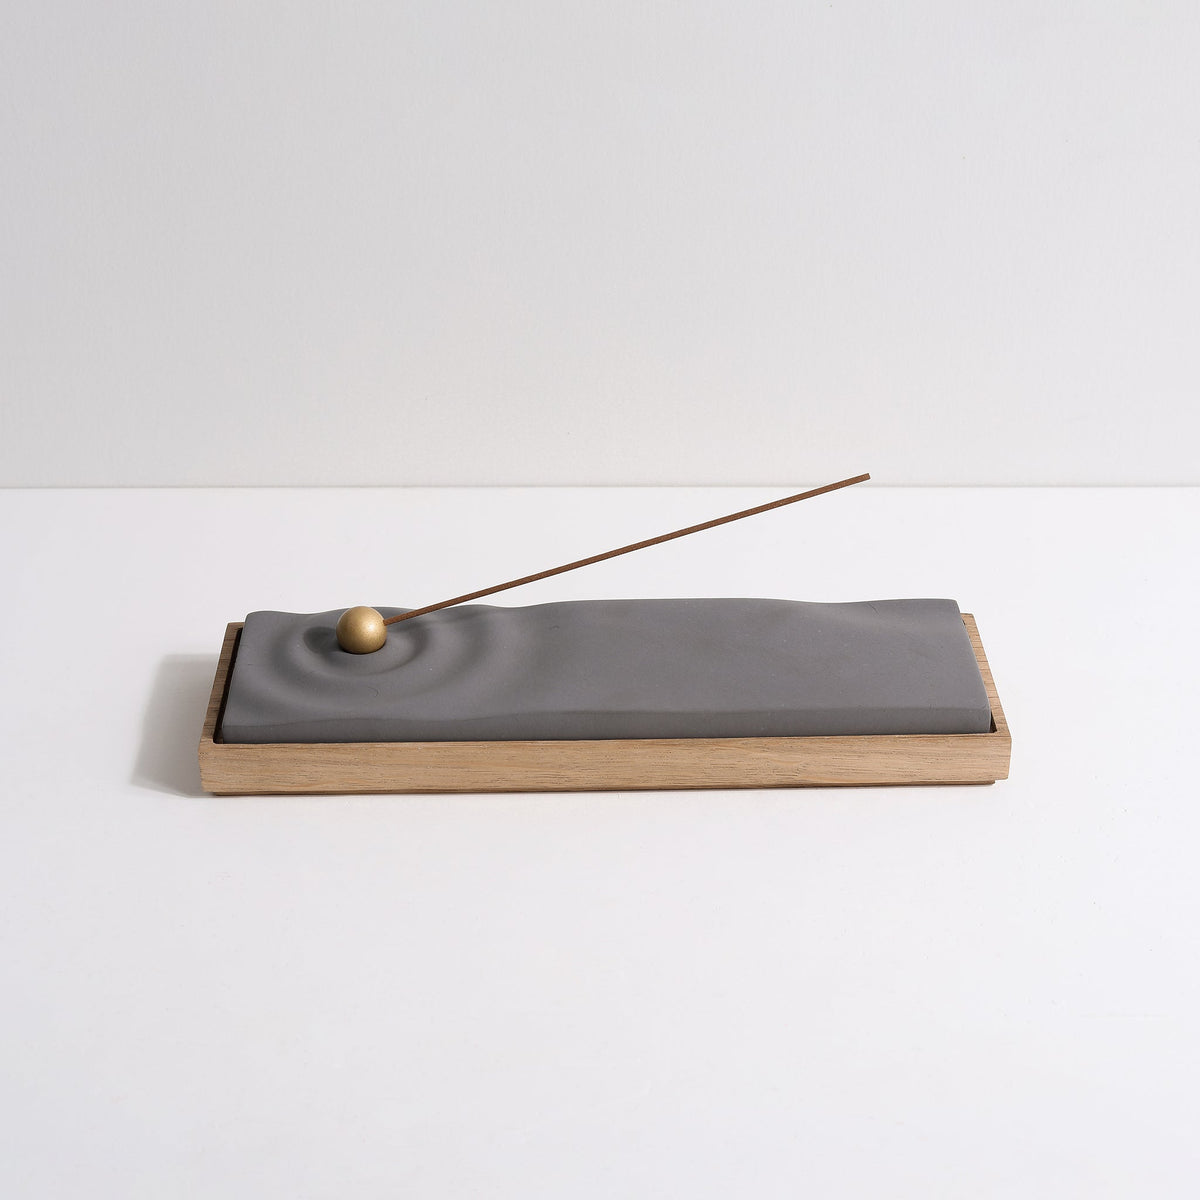 Concrete ripple incense burner with white oak base by Kin Objects